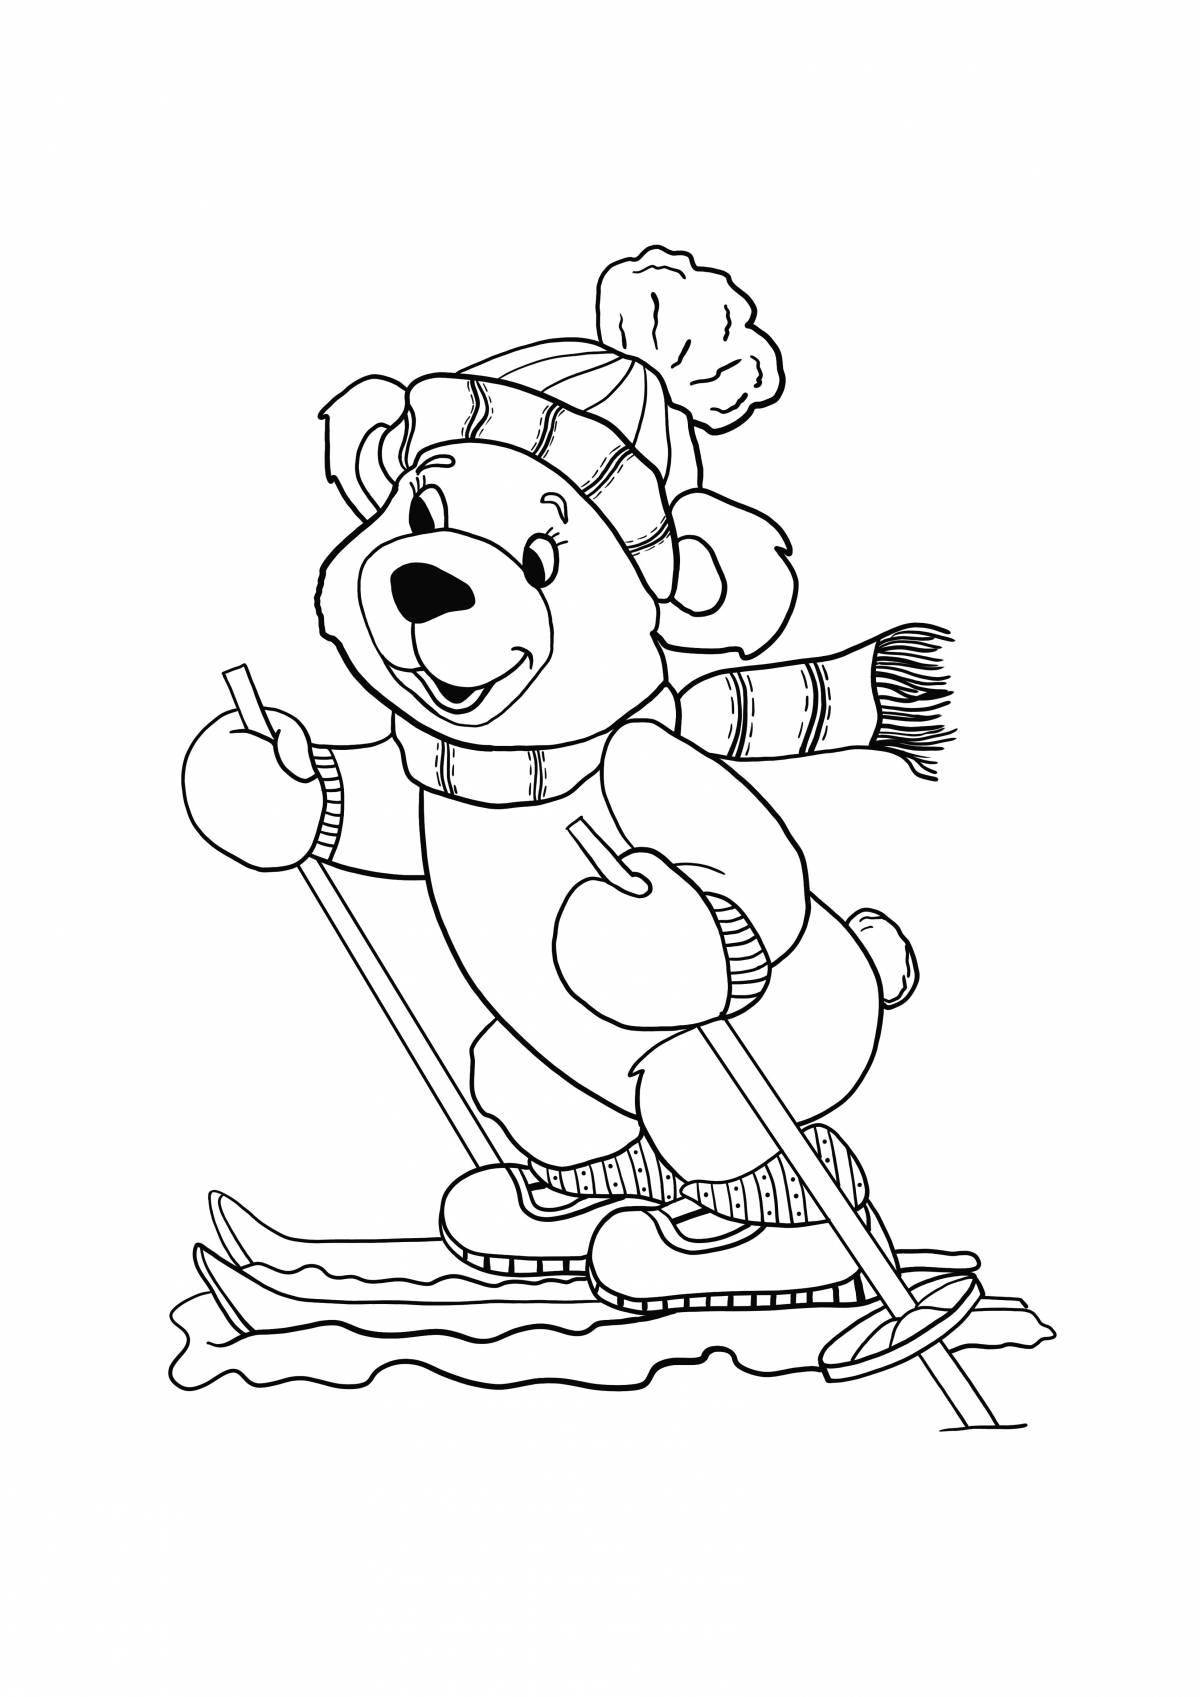 Cold bear coloring in winter